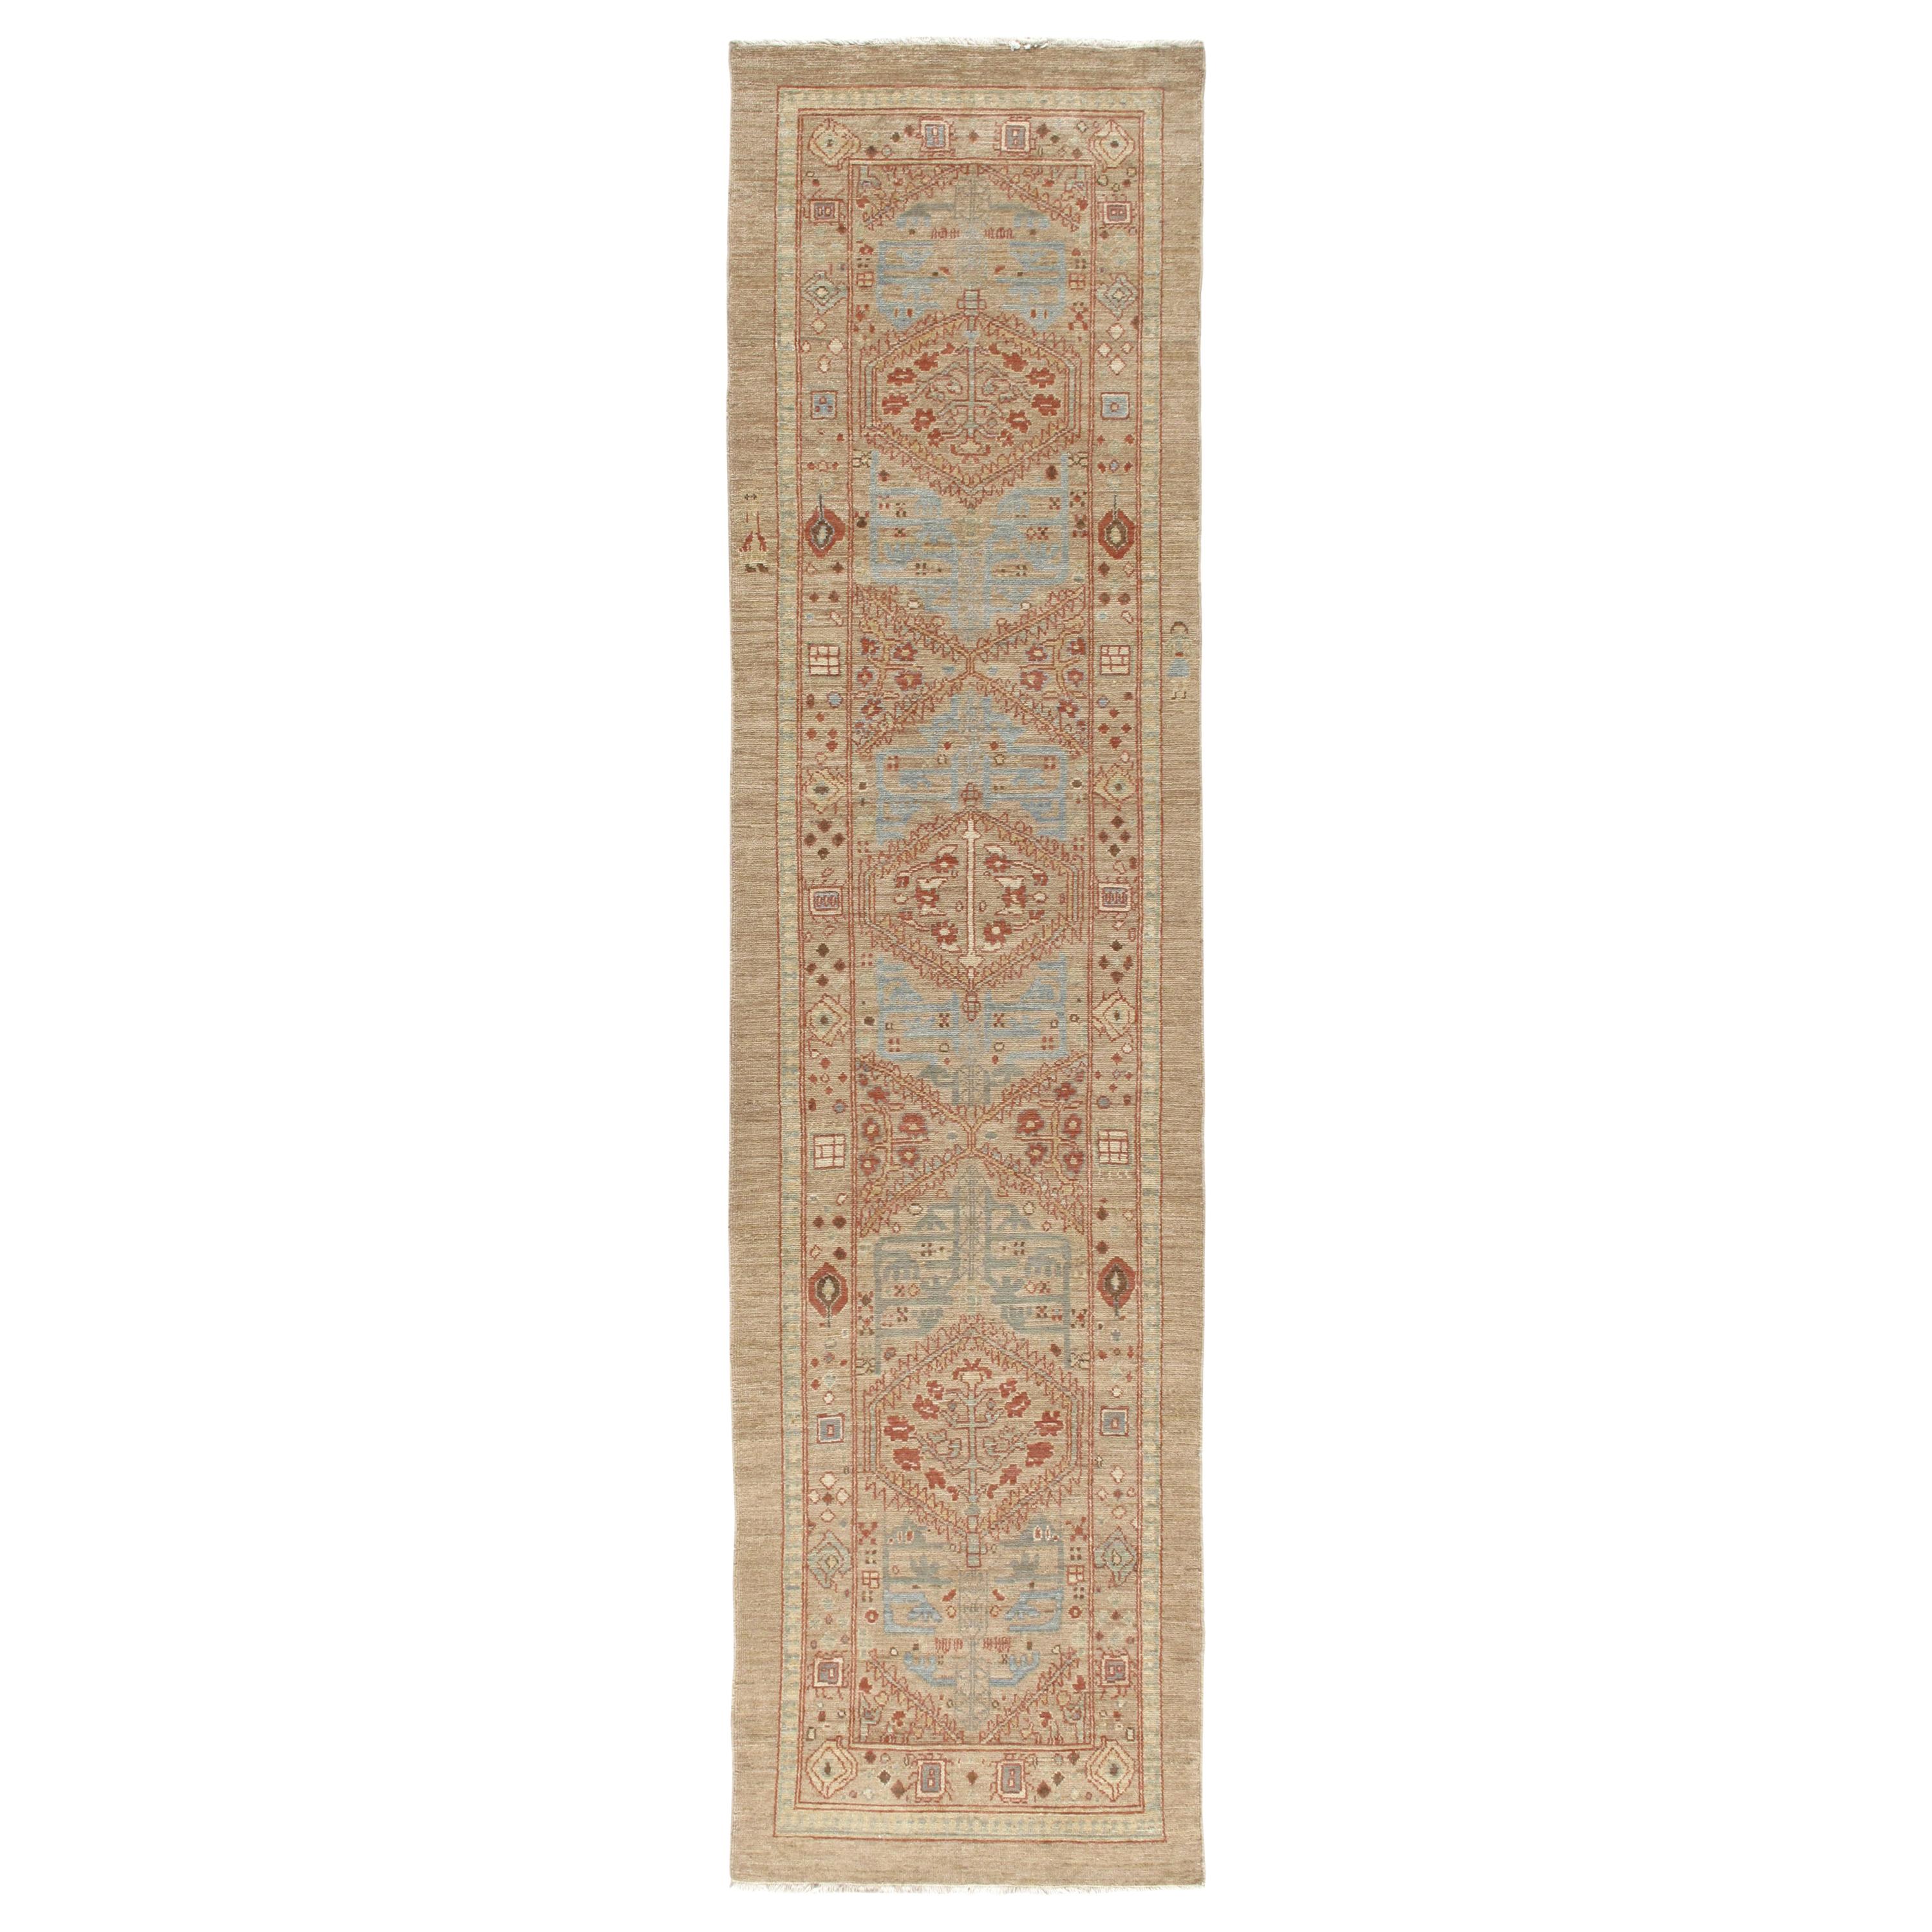 Persian Traditional Kurdish Hand Knotted Runner Rug in Camel, Pale Blue, and Red